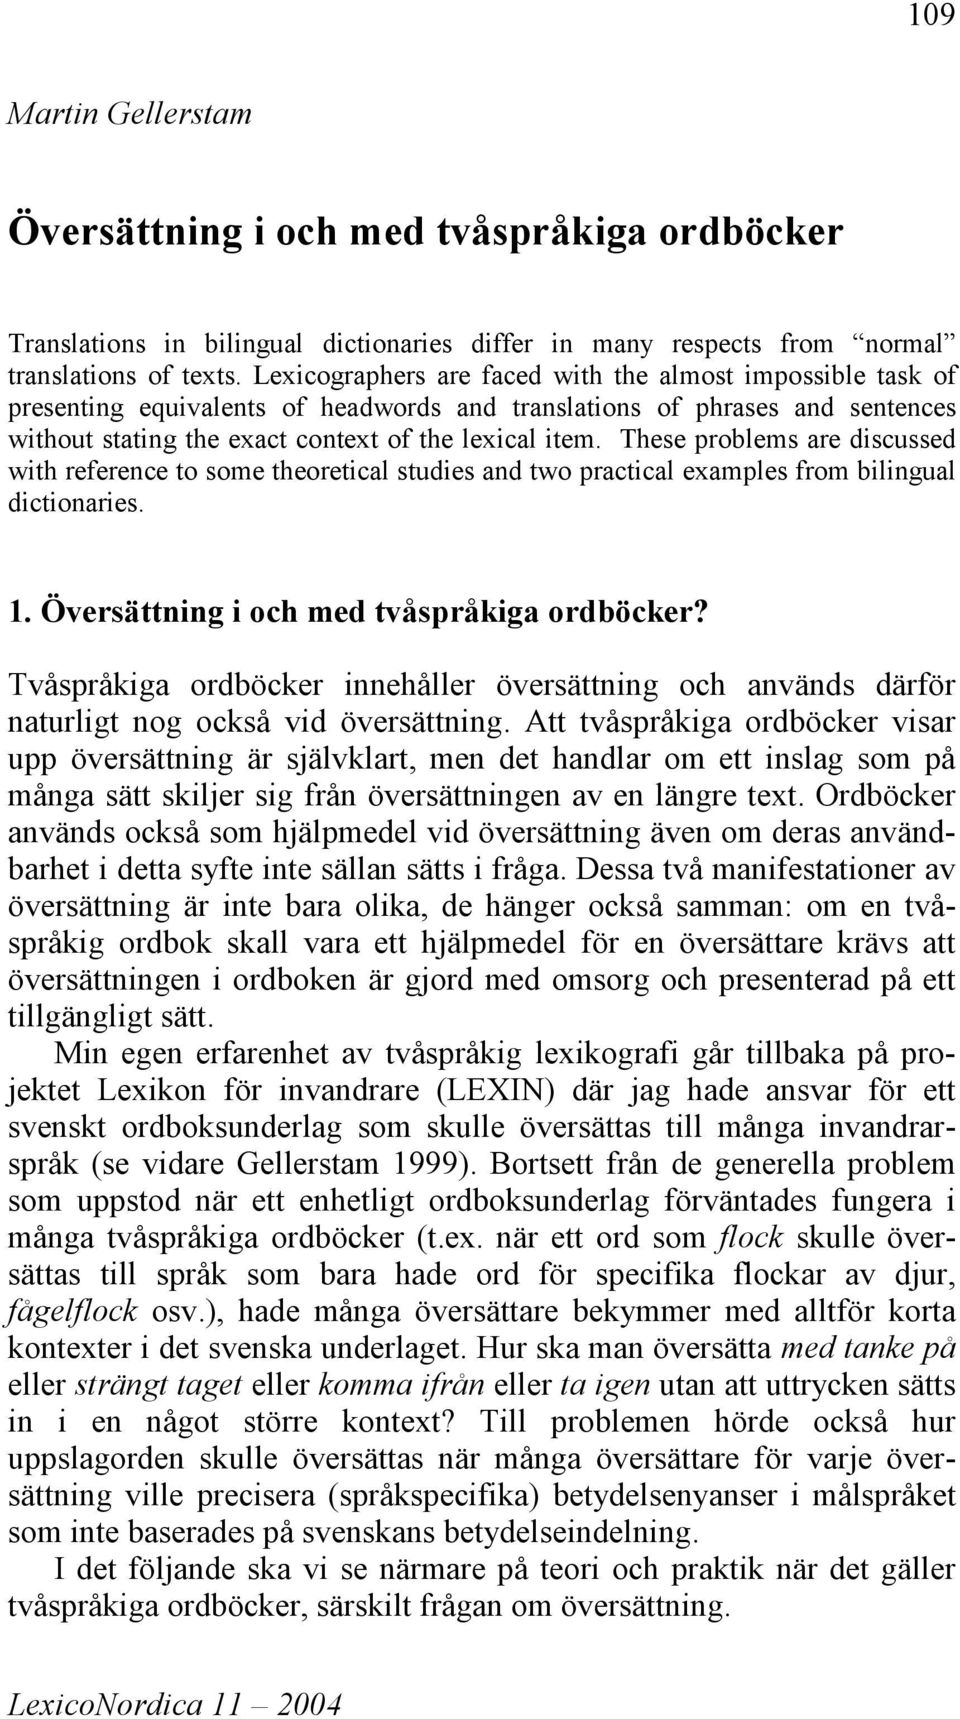 These problems are discussed with reference to some theoretical studies and two practical examples from bilingual dictionaries. 1. Översättning i och med tvåspråkiga ordböcker?